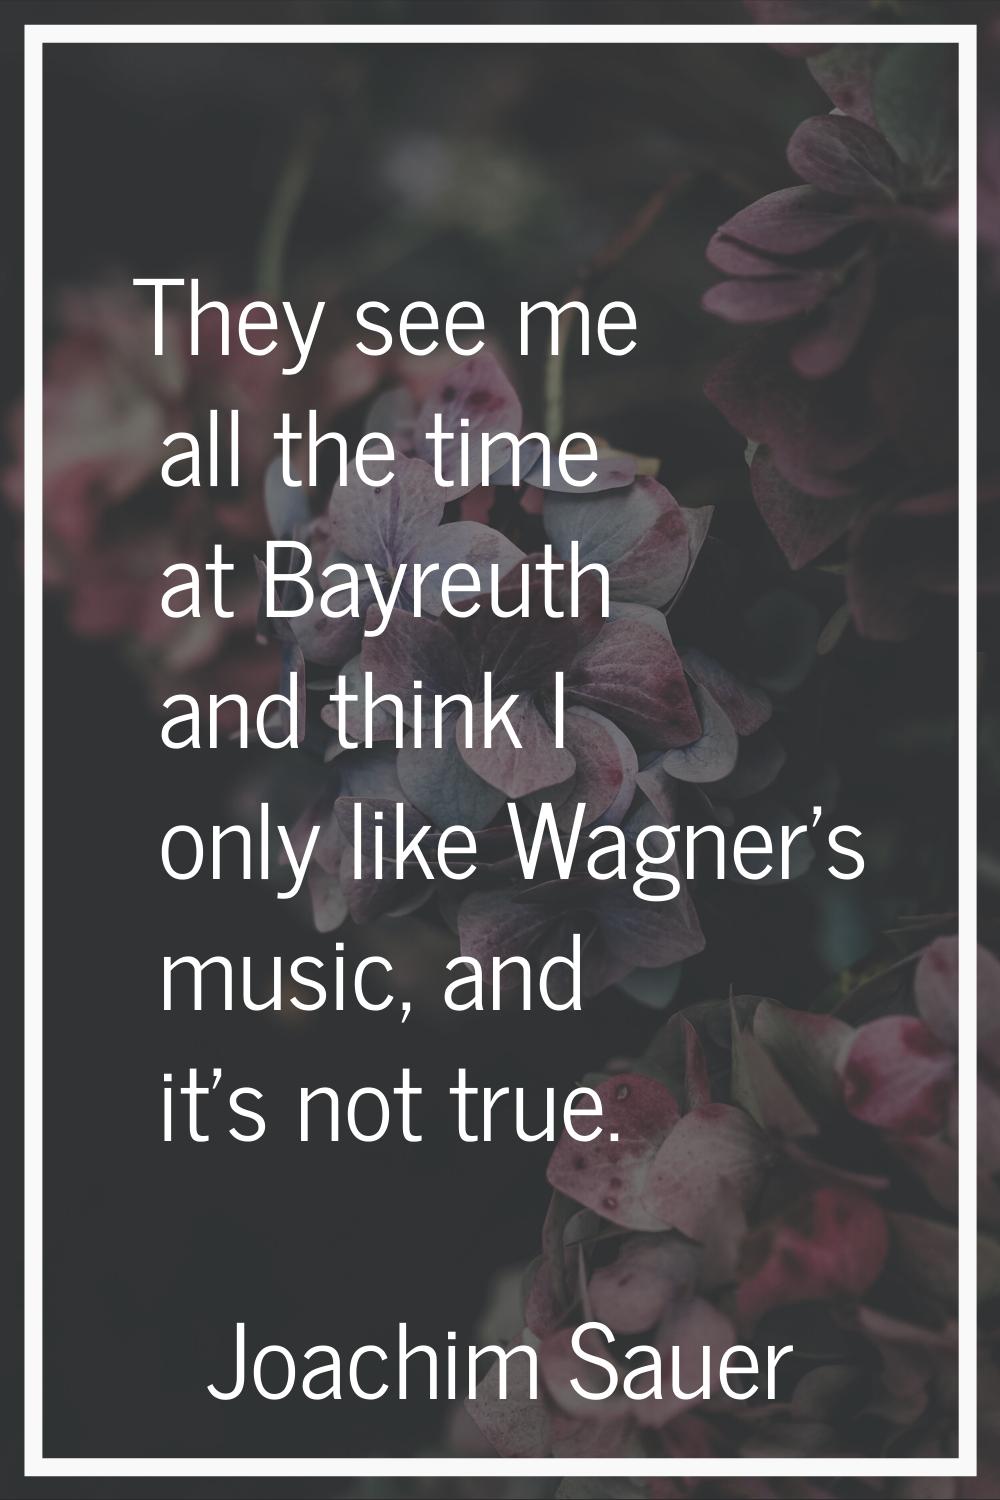 They see me all the time at Bayreuth and think I only like Wagner's music, and it's not true.